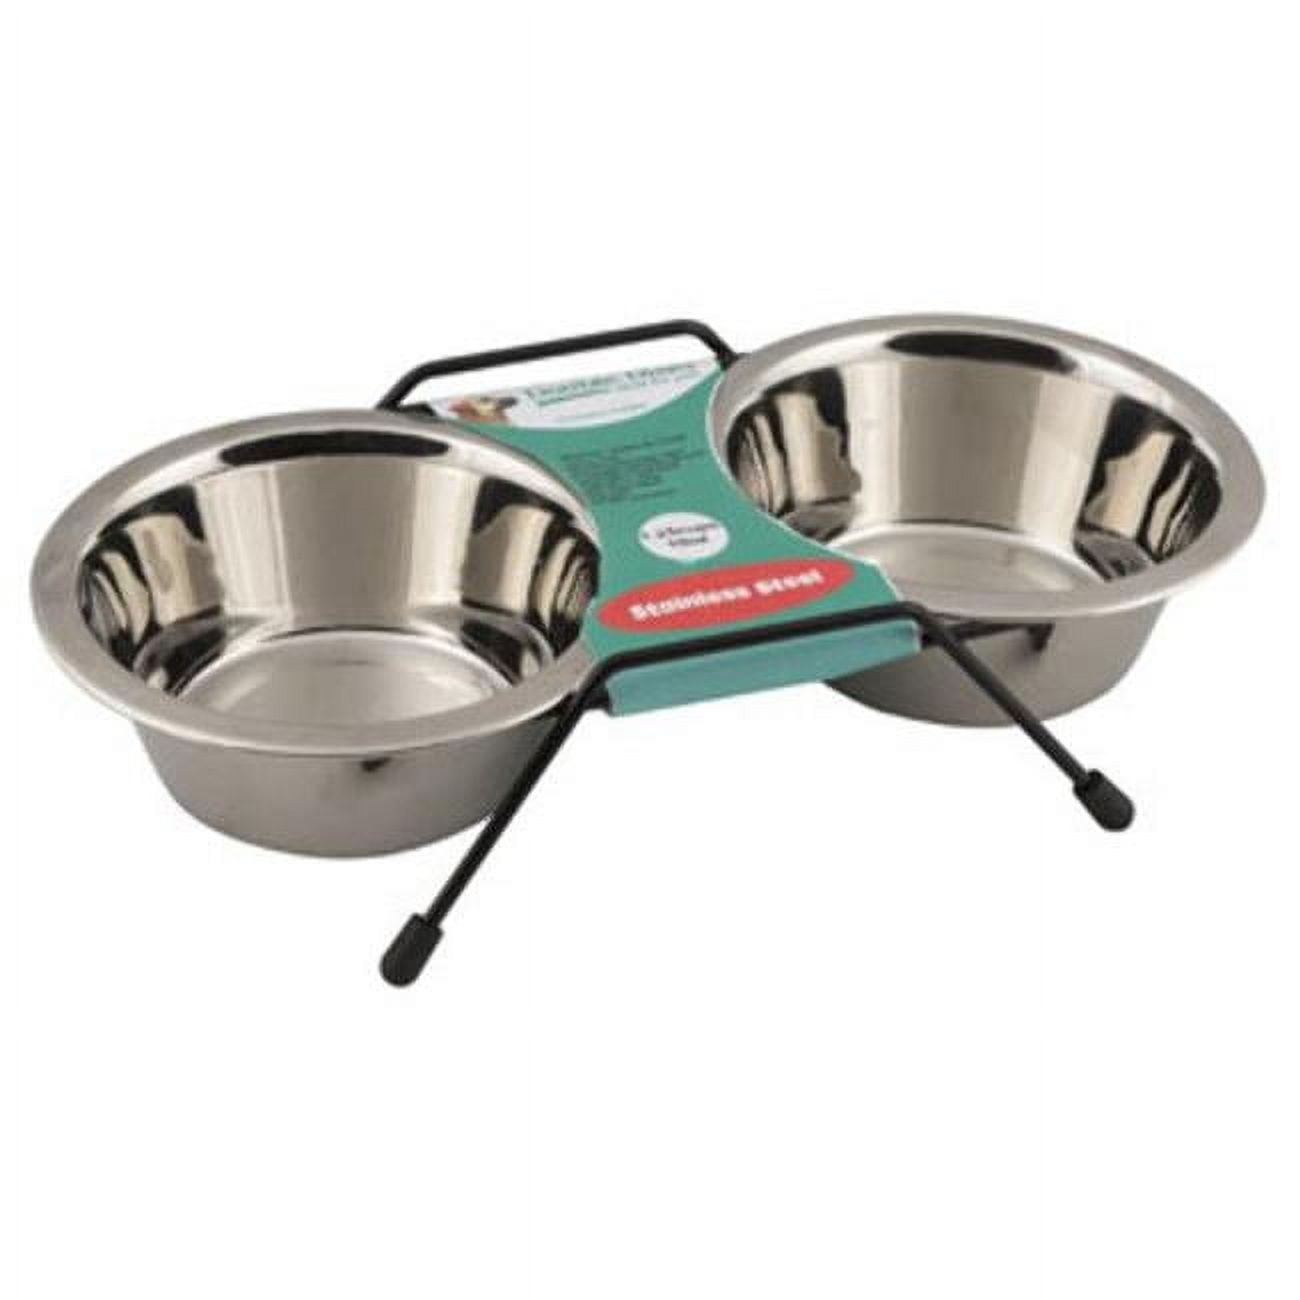 2324873 12 Oz Double Stainless Steel Pet Bowl On Stand, Silver & Black - Case Of 18 - 18 Per Pack